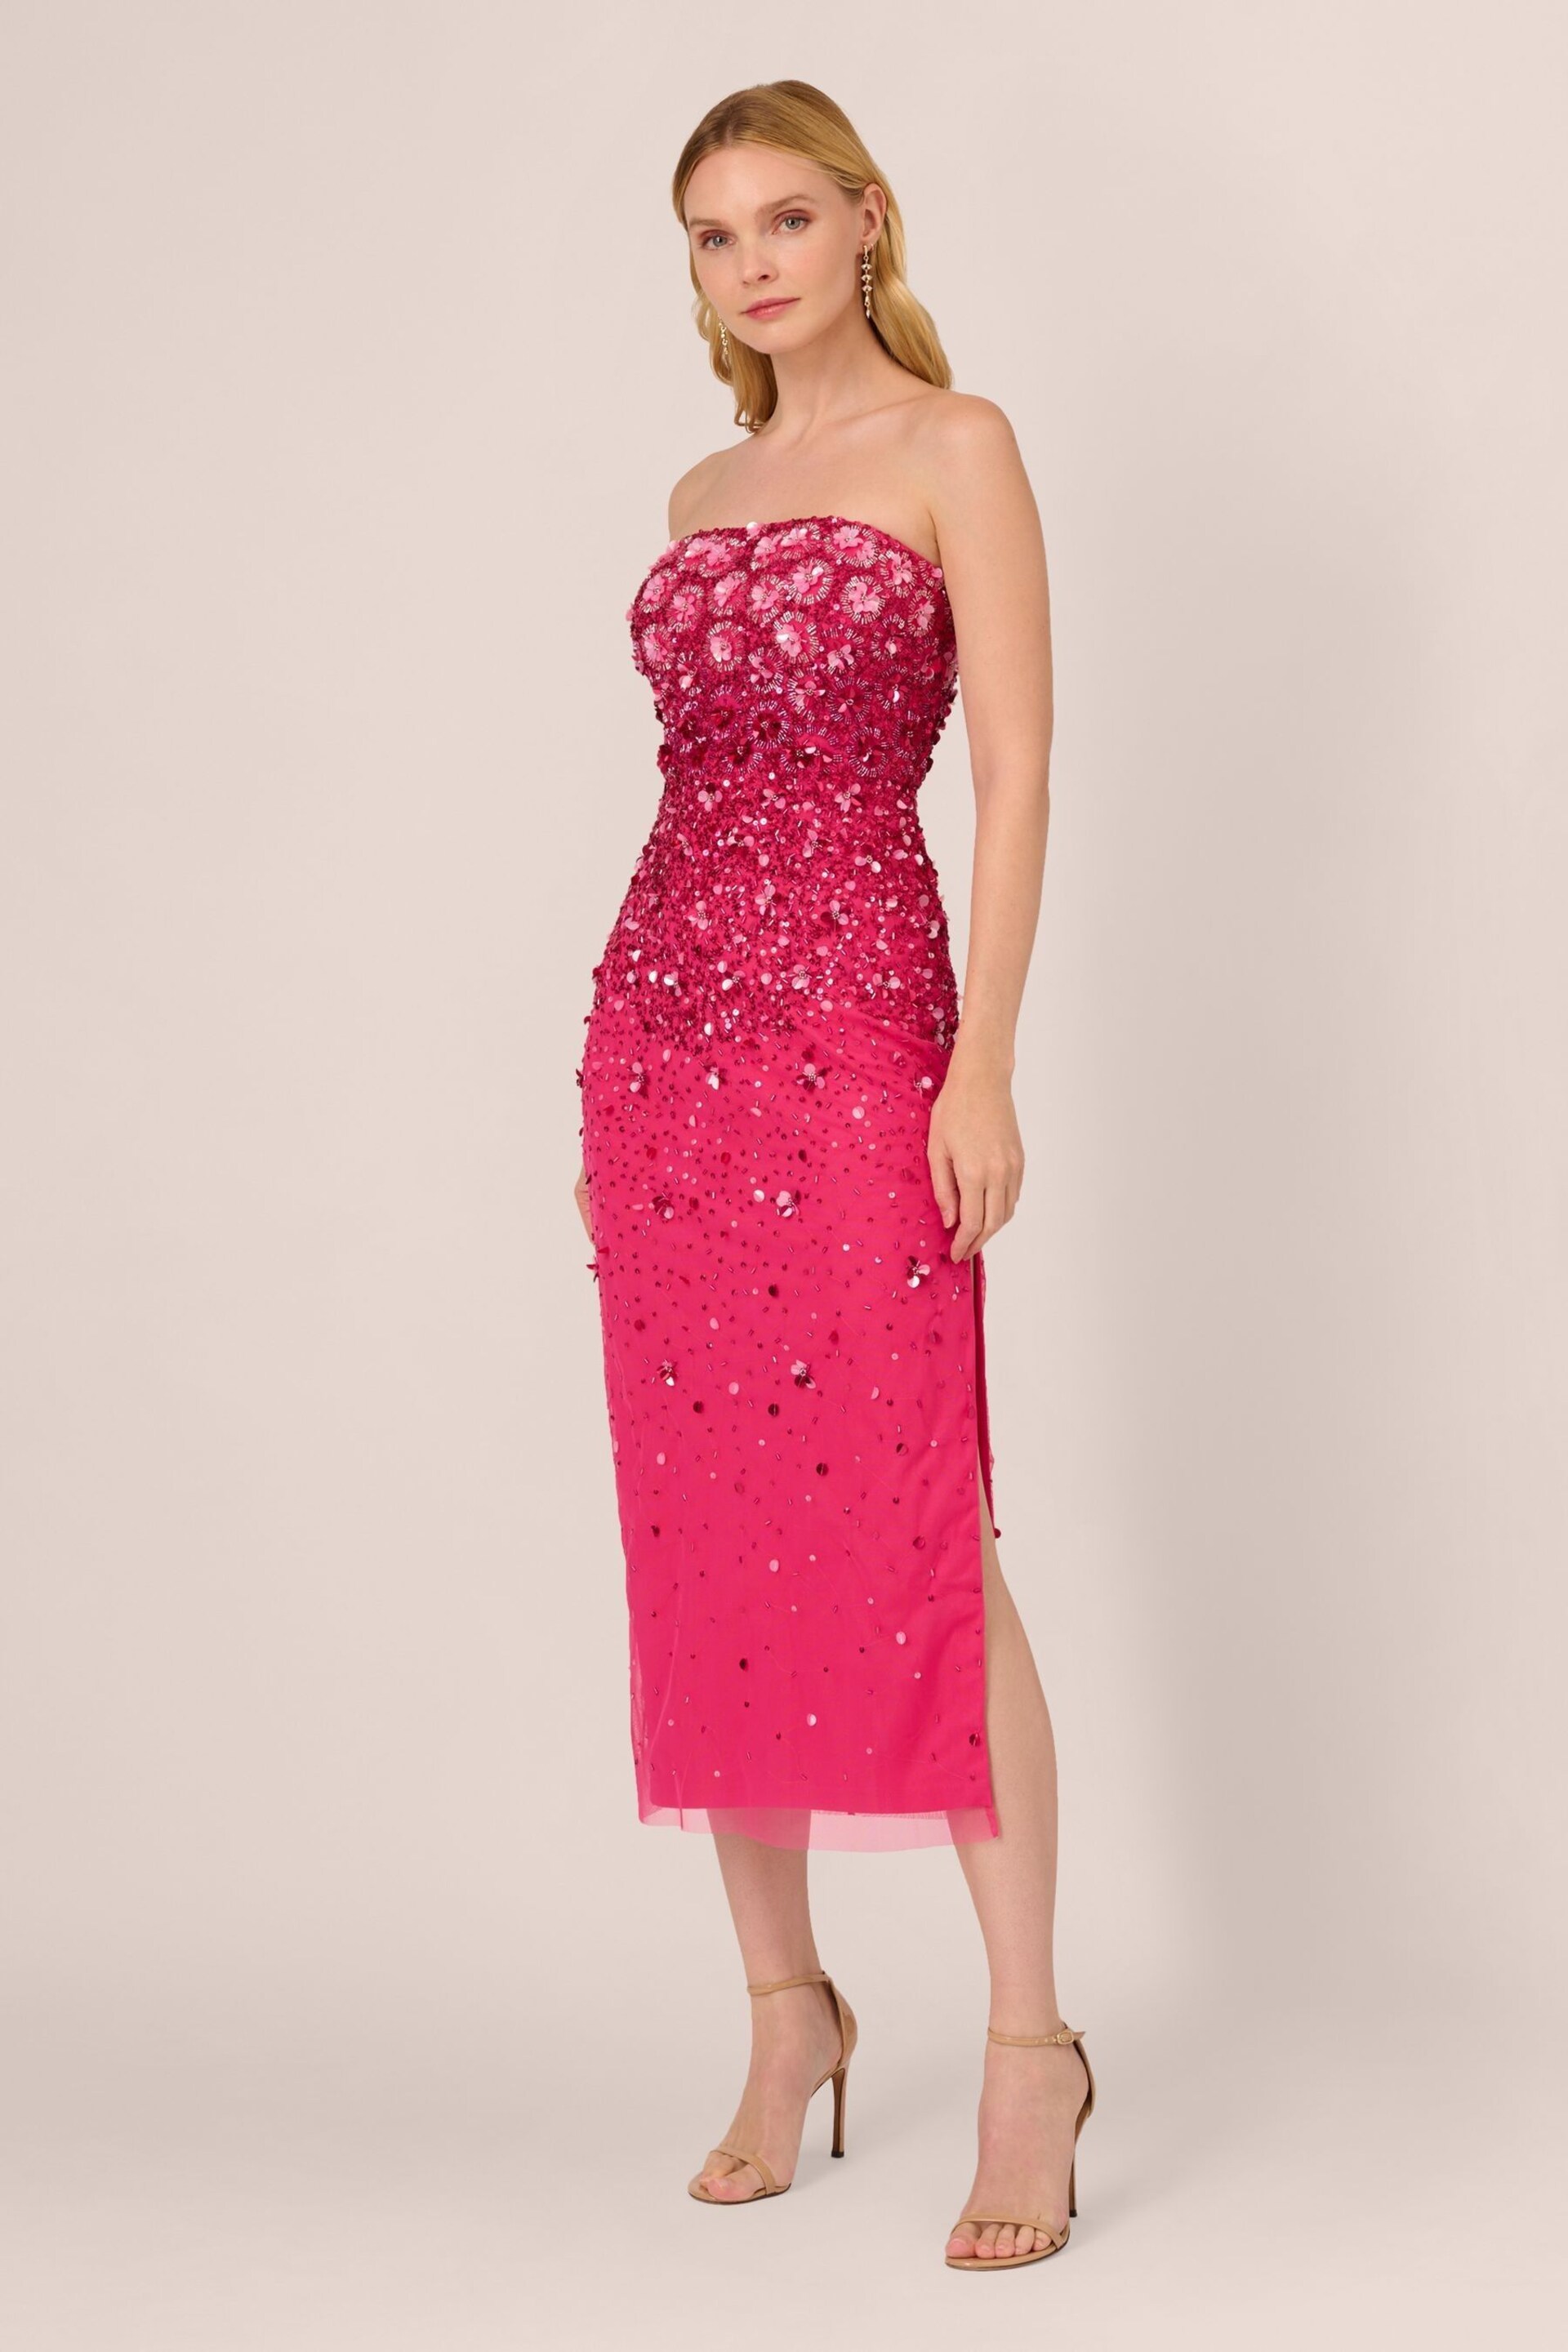 Adrianna Papell Pink Beaded Strapless Dress - Image 3 of 7